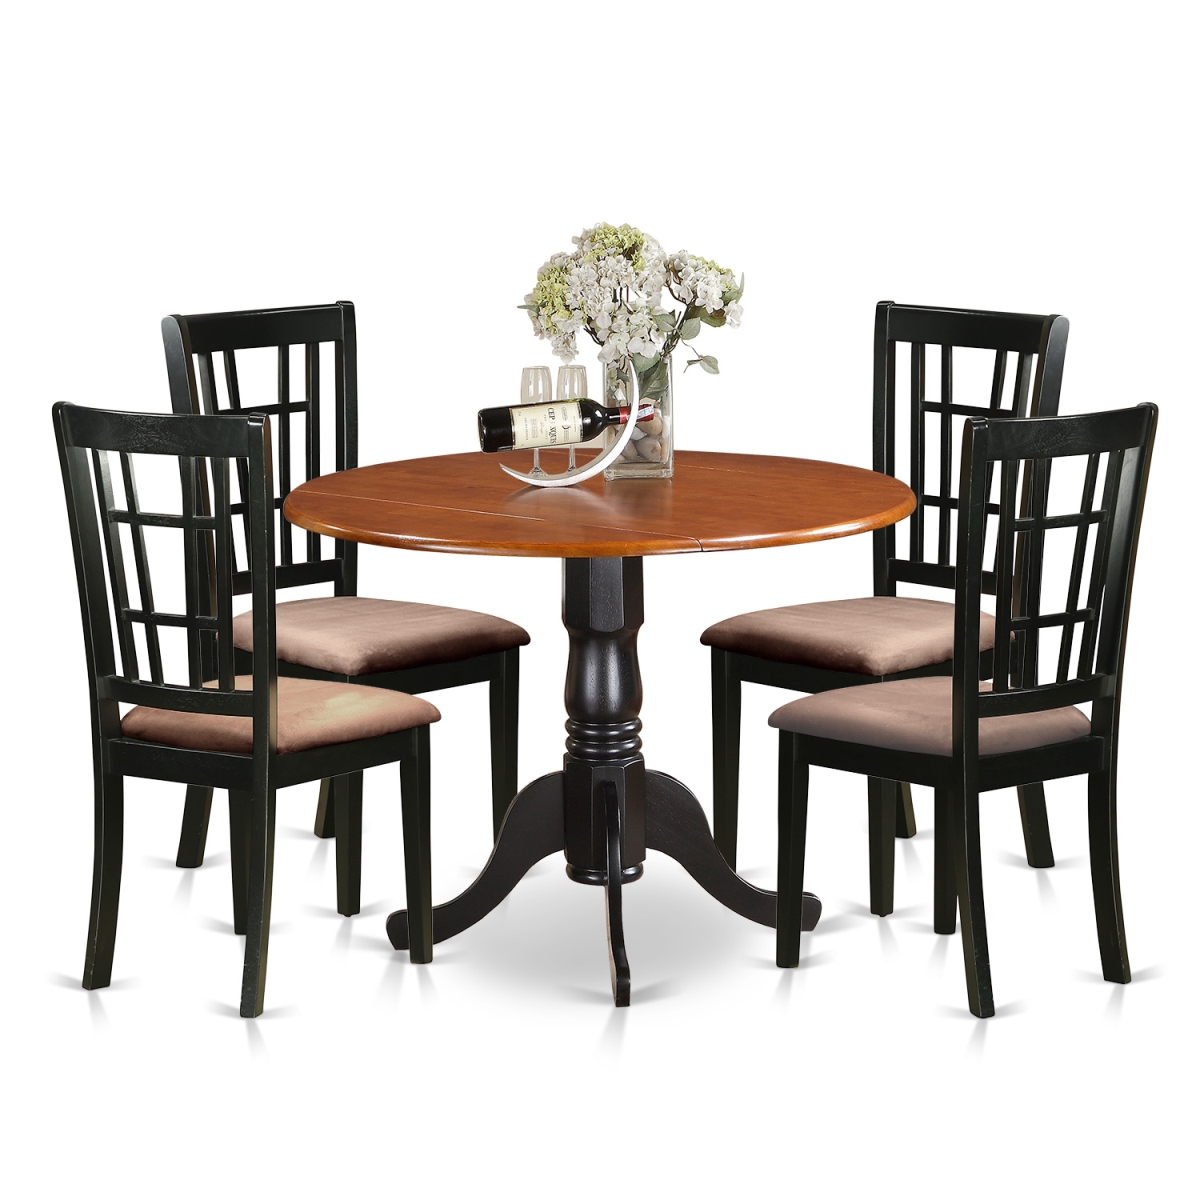 Picture of East West Furniture DLNI5-BCH-C Microfiber Dublin Kitchen Table Set - Dining Table & 4 Solid Wood Chairs, Black & Cherry - 5 Piece